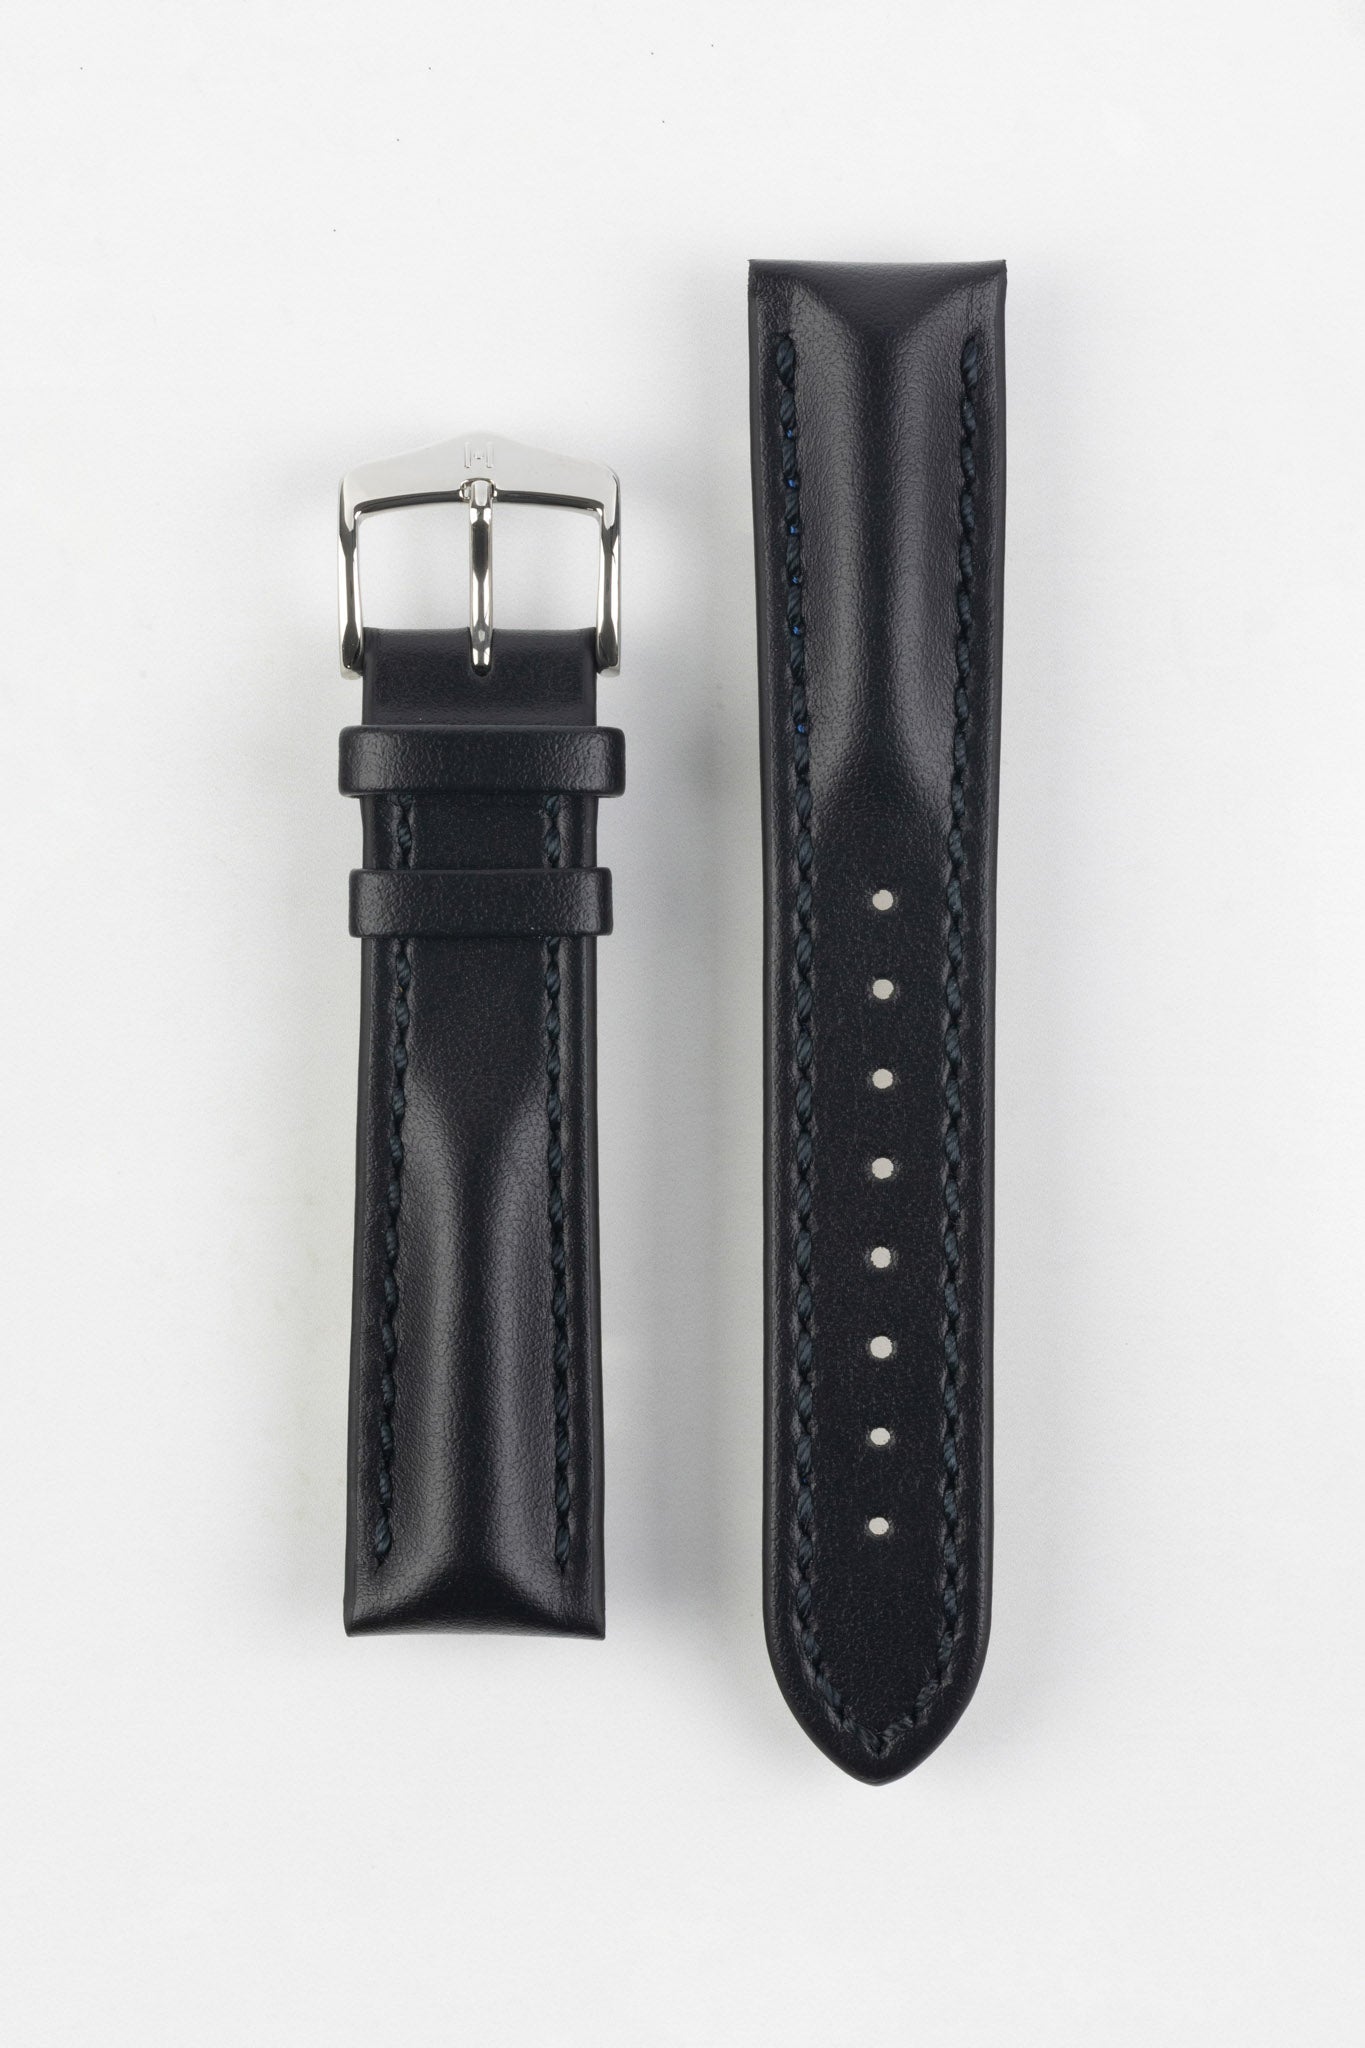 Hirsch HEAVY CALF Water-Resistant Calf Leather Watch Strap in BLACK / BLACK